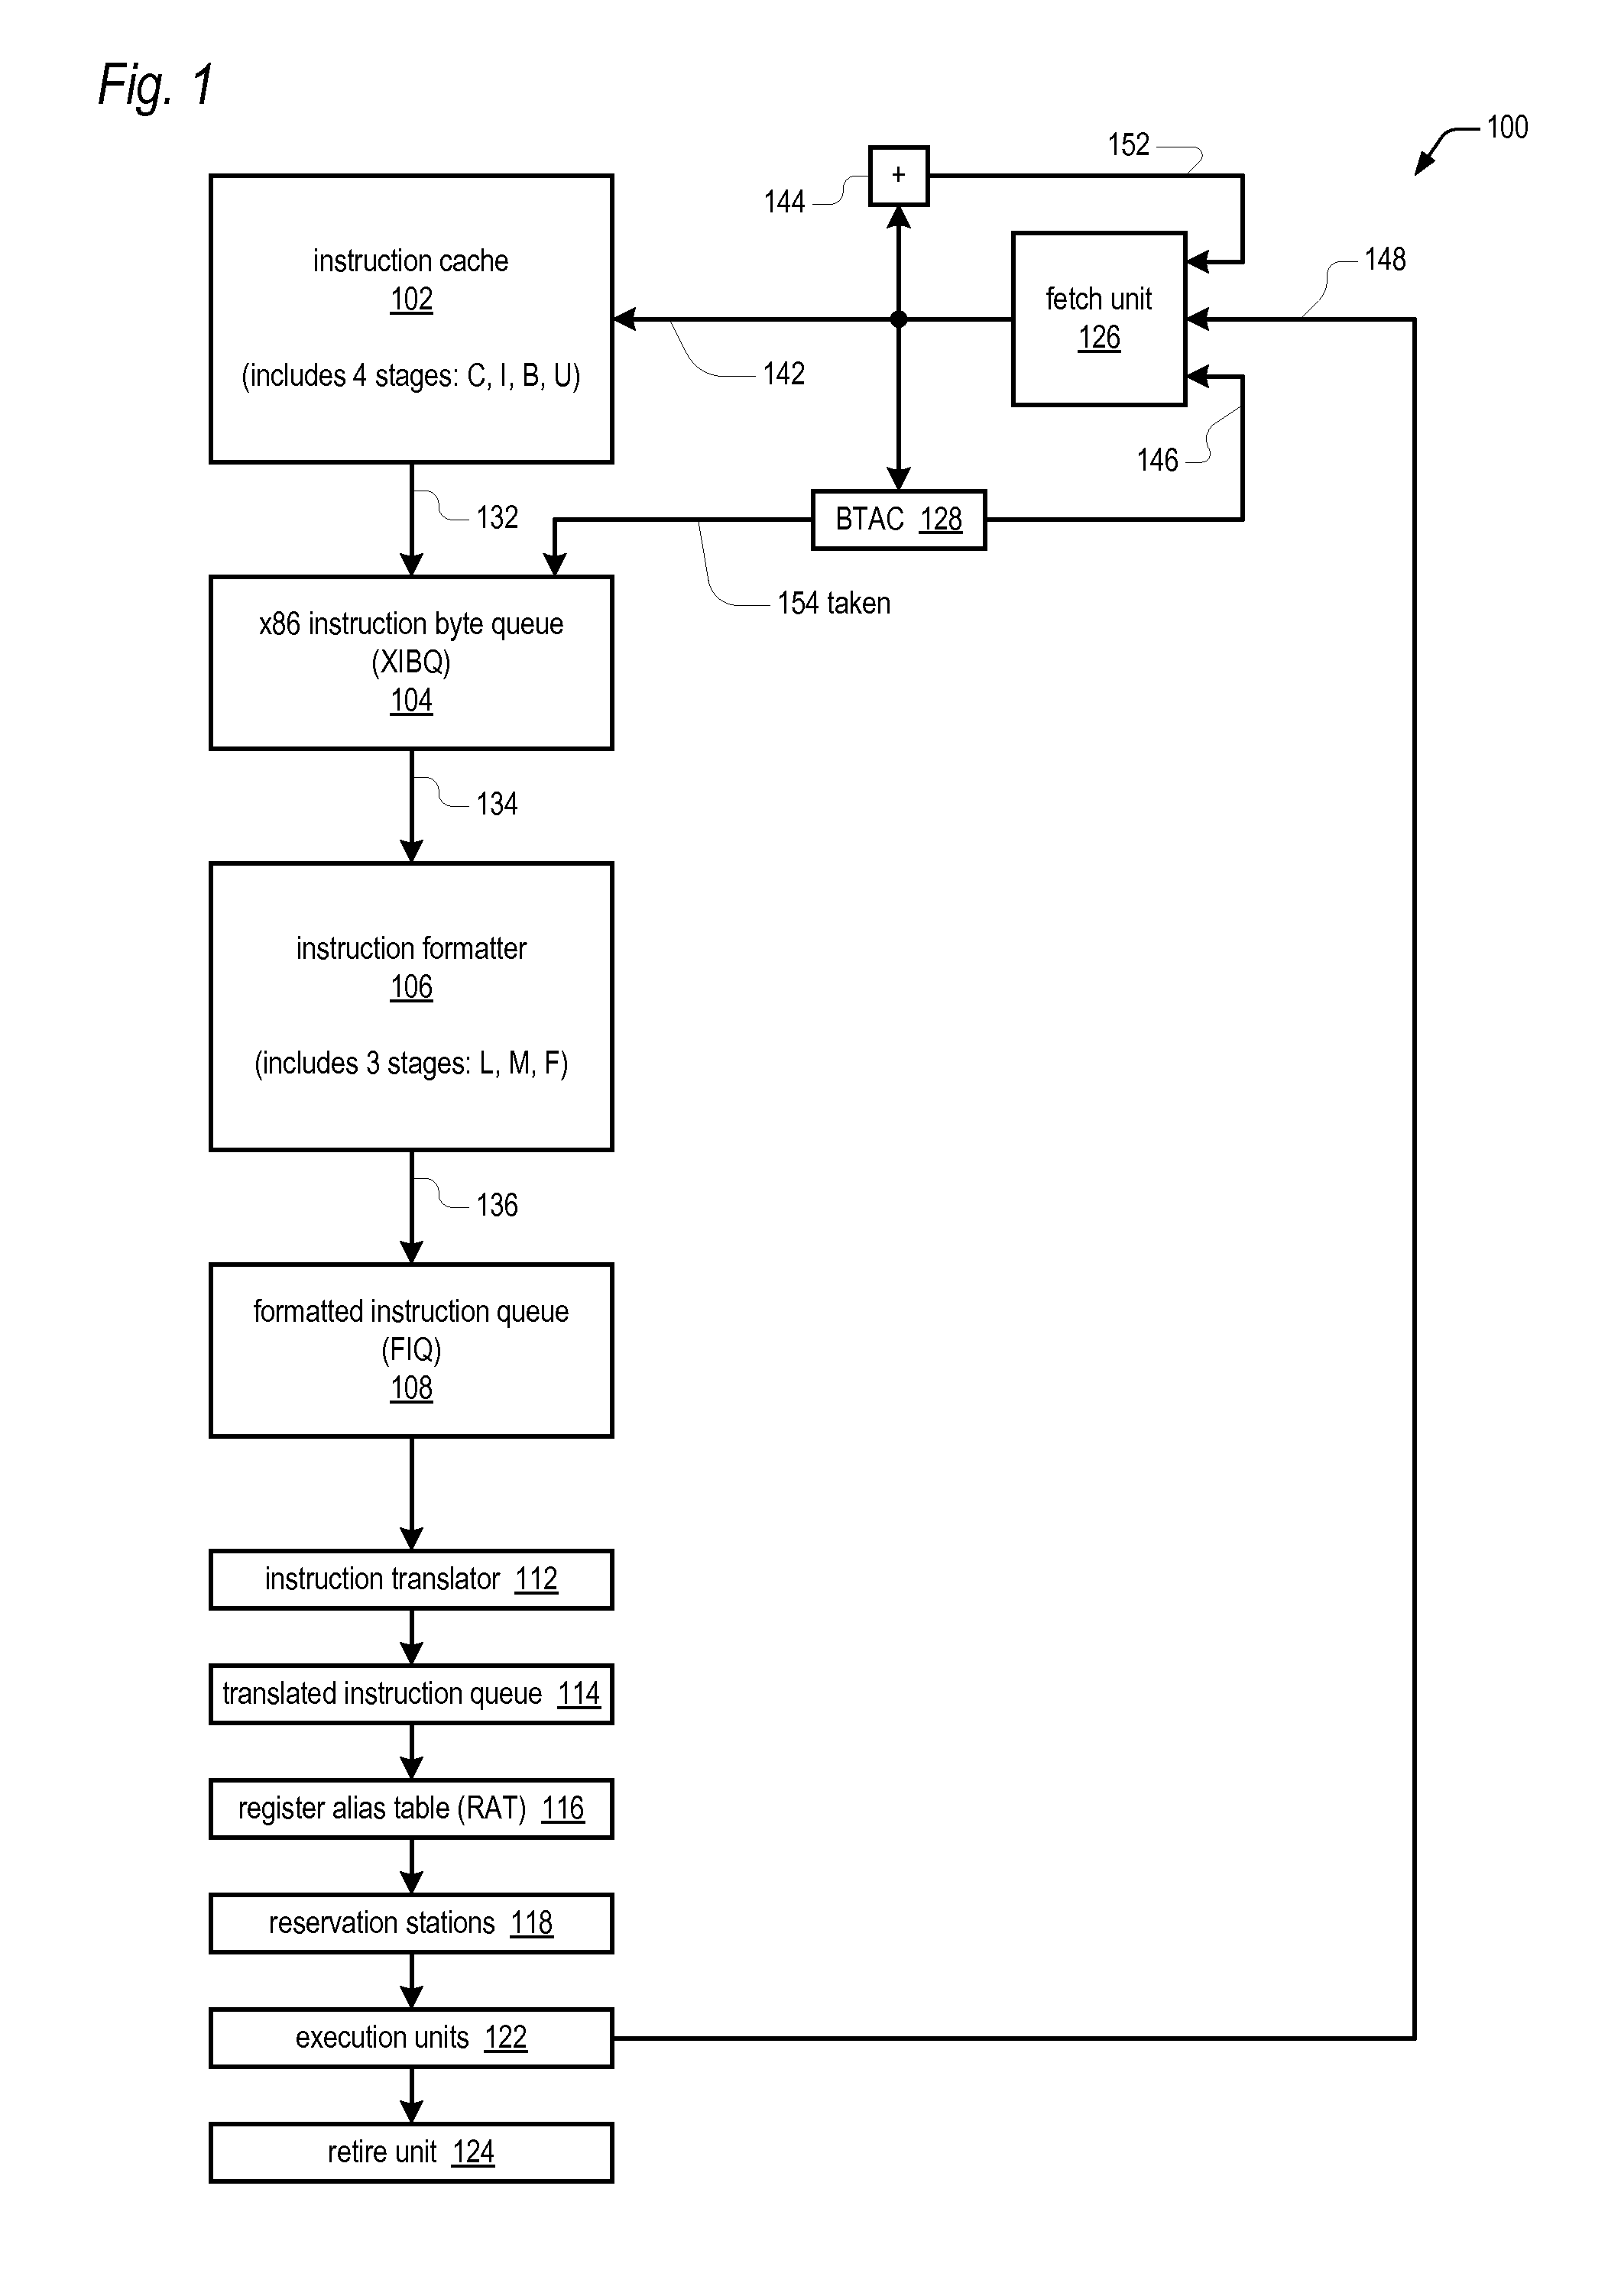 Prefix accumulation for efficient processing of instructions with multiple prefix bytes